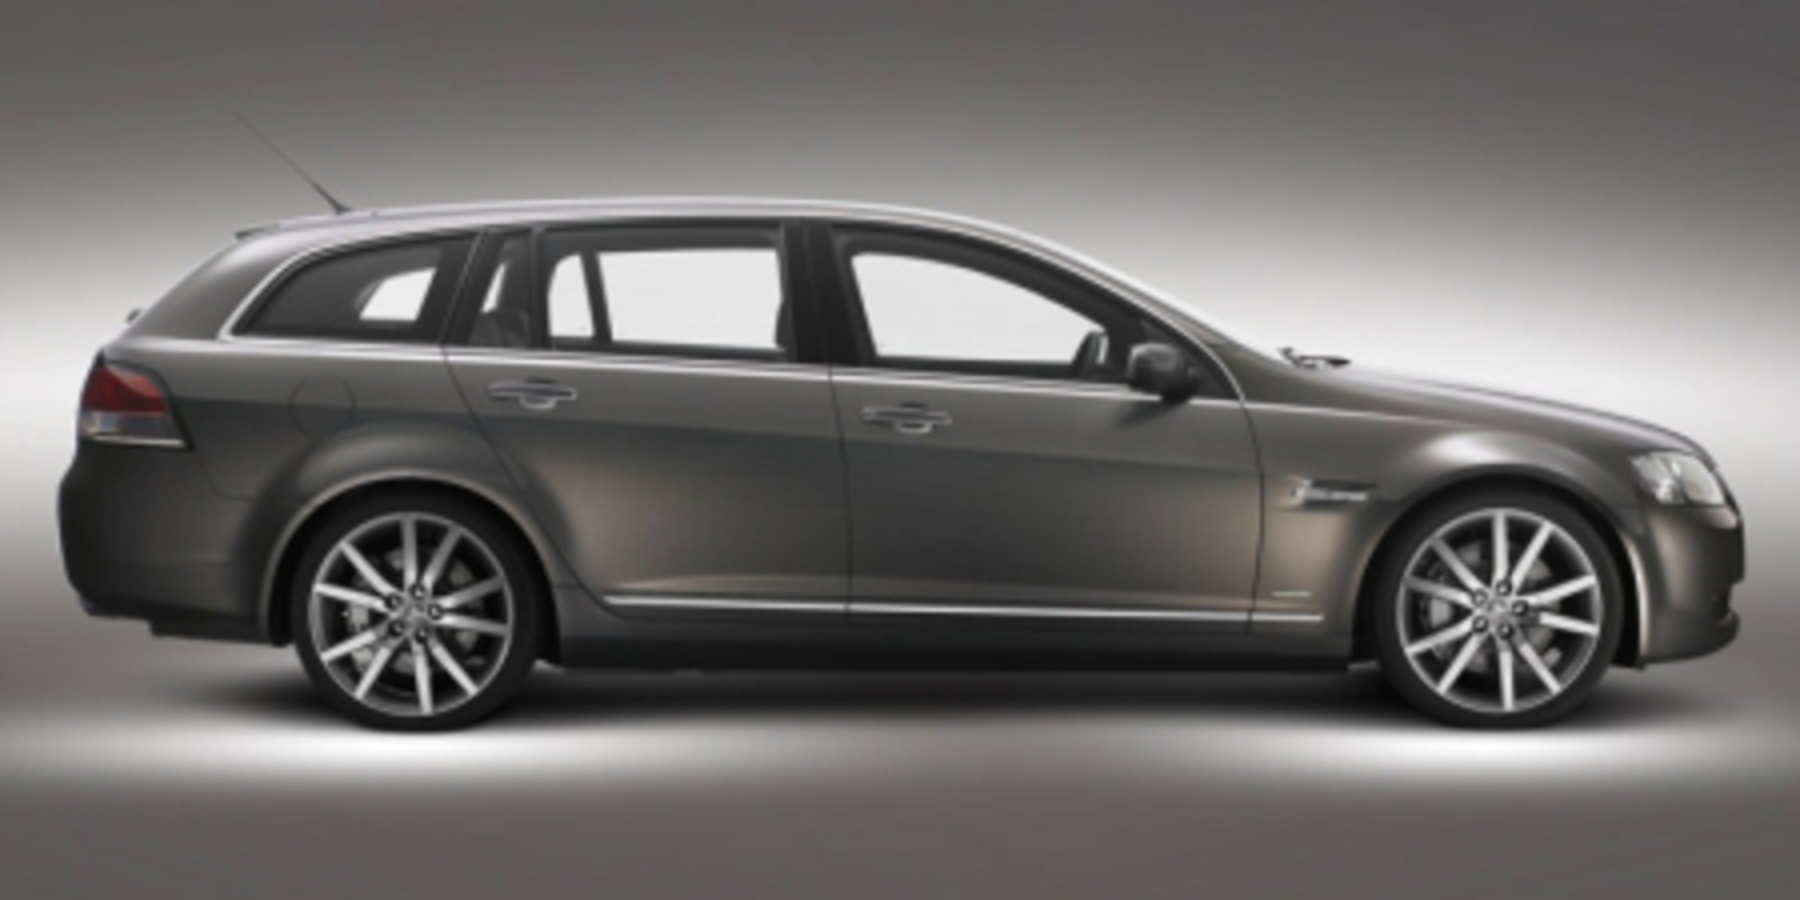 Holden Commodore VE Sportwagon. The information was confirmed yesterday by